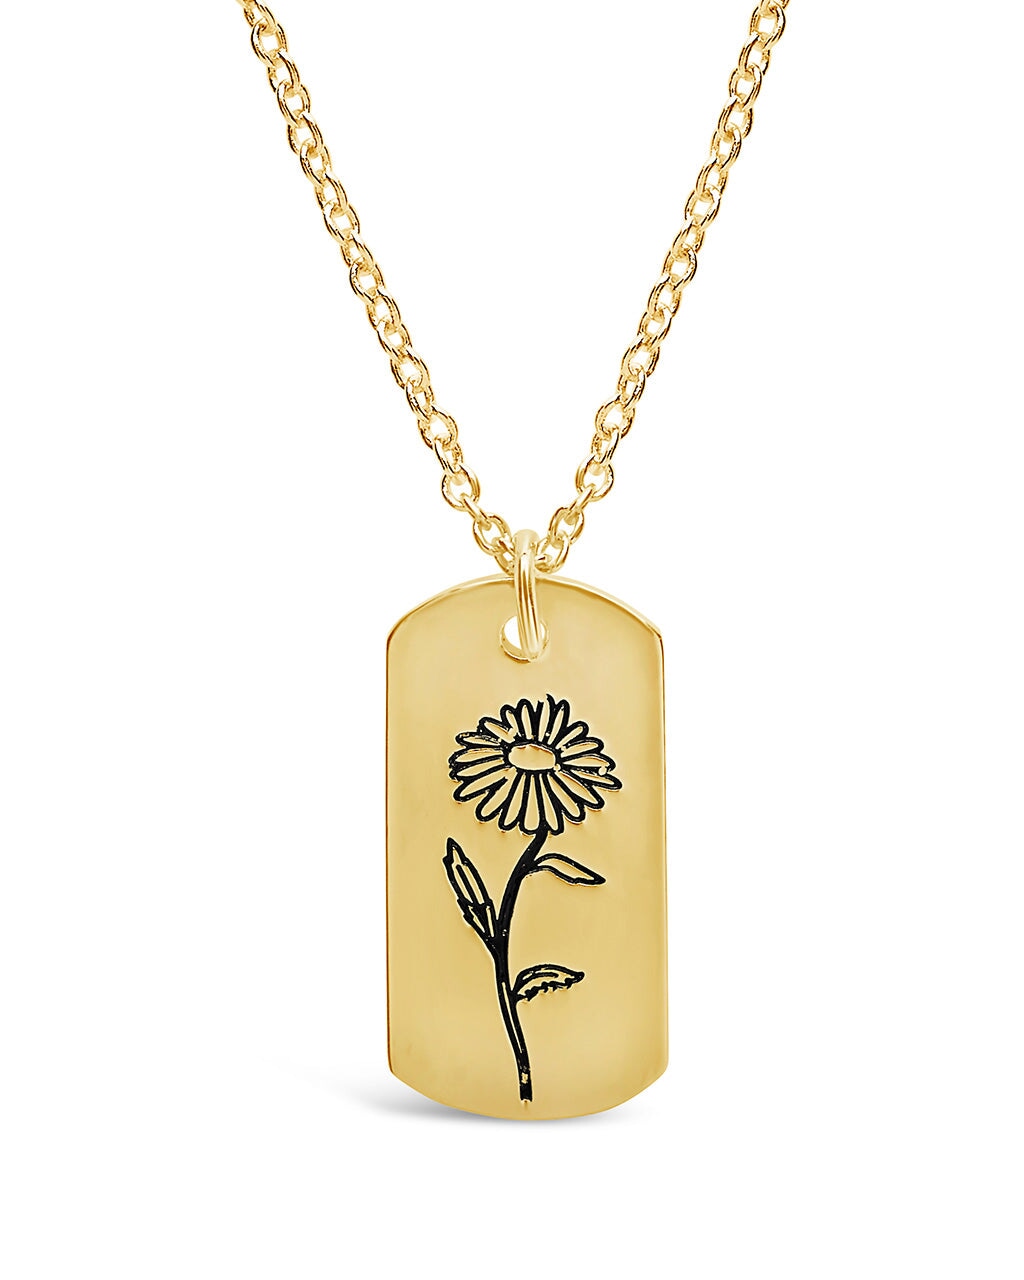 Birth Flower Pendant Necklace Sterling Forever Gold April / Daisy 